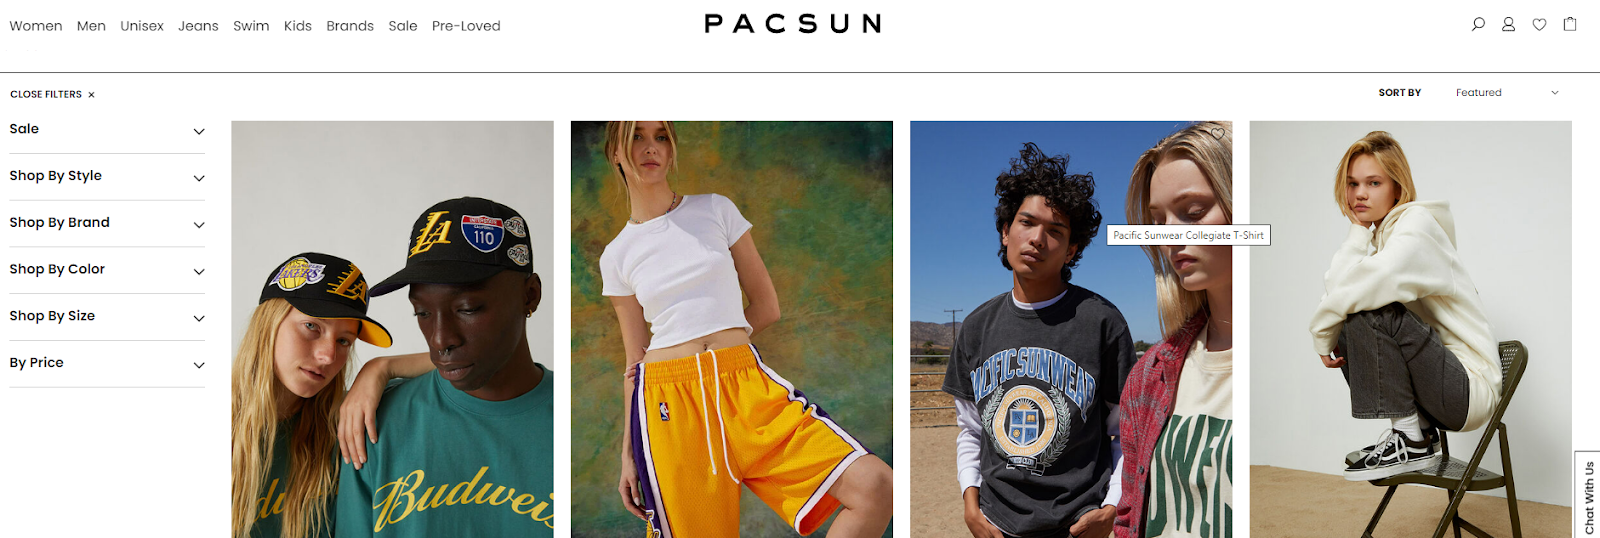 PacSun is the go-to for the latest jeans